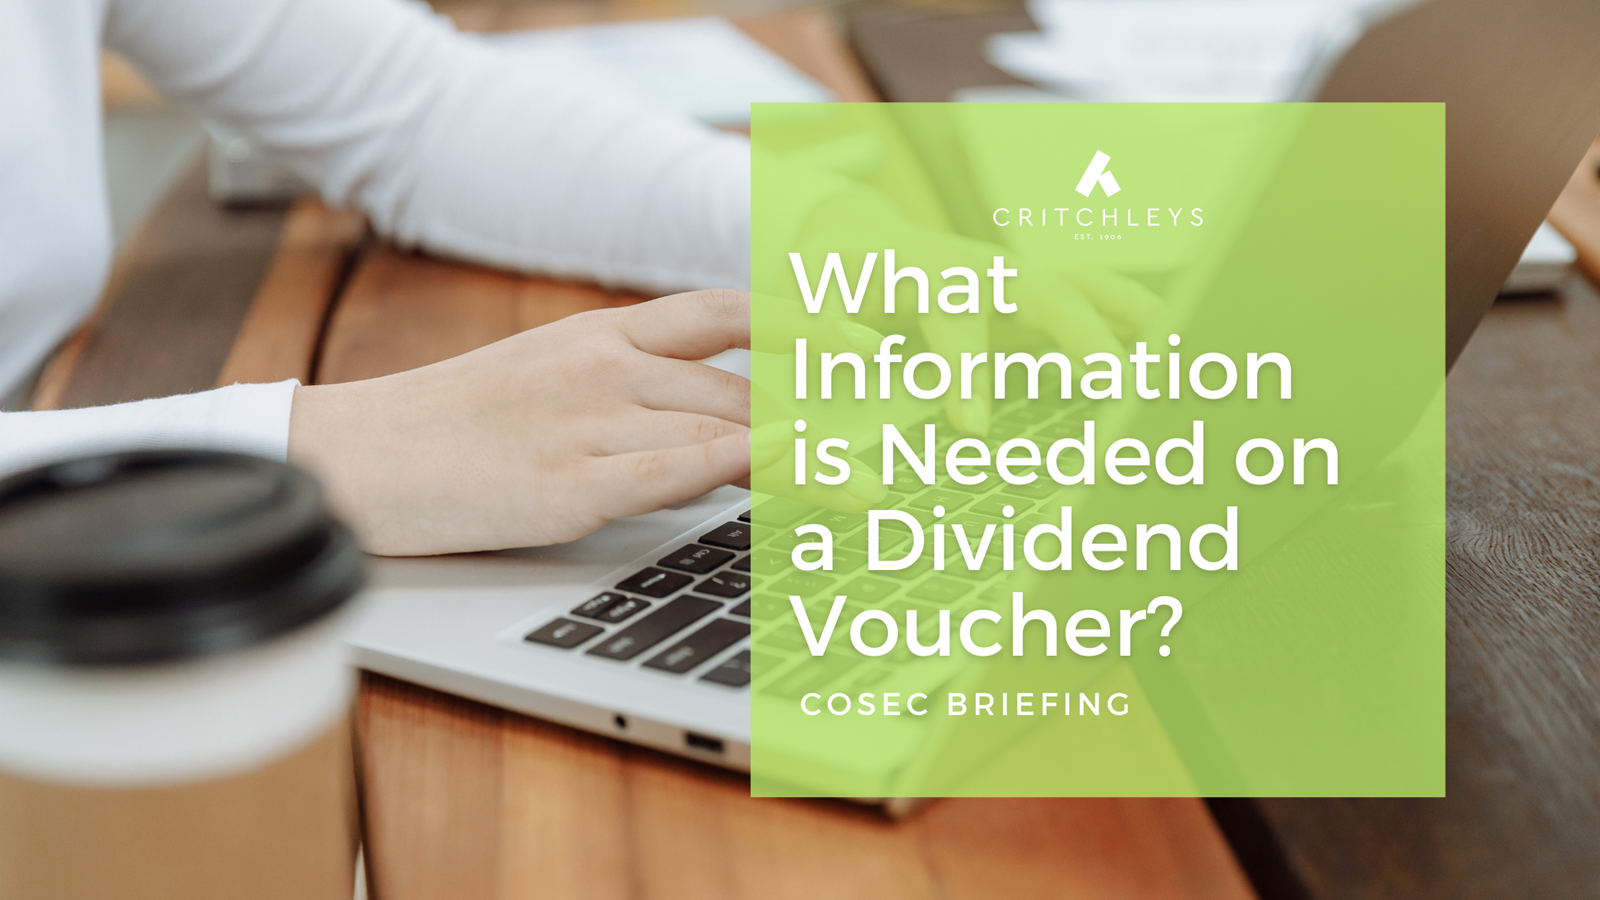 What Information is Needed on a Dividend Voucher?